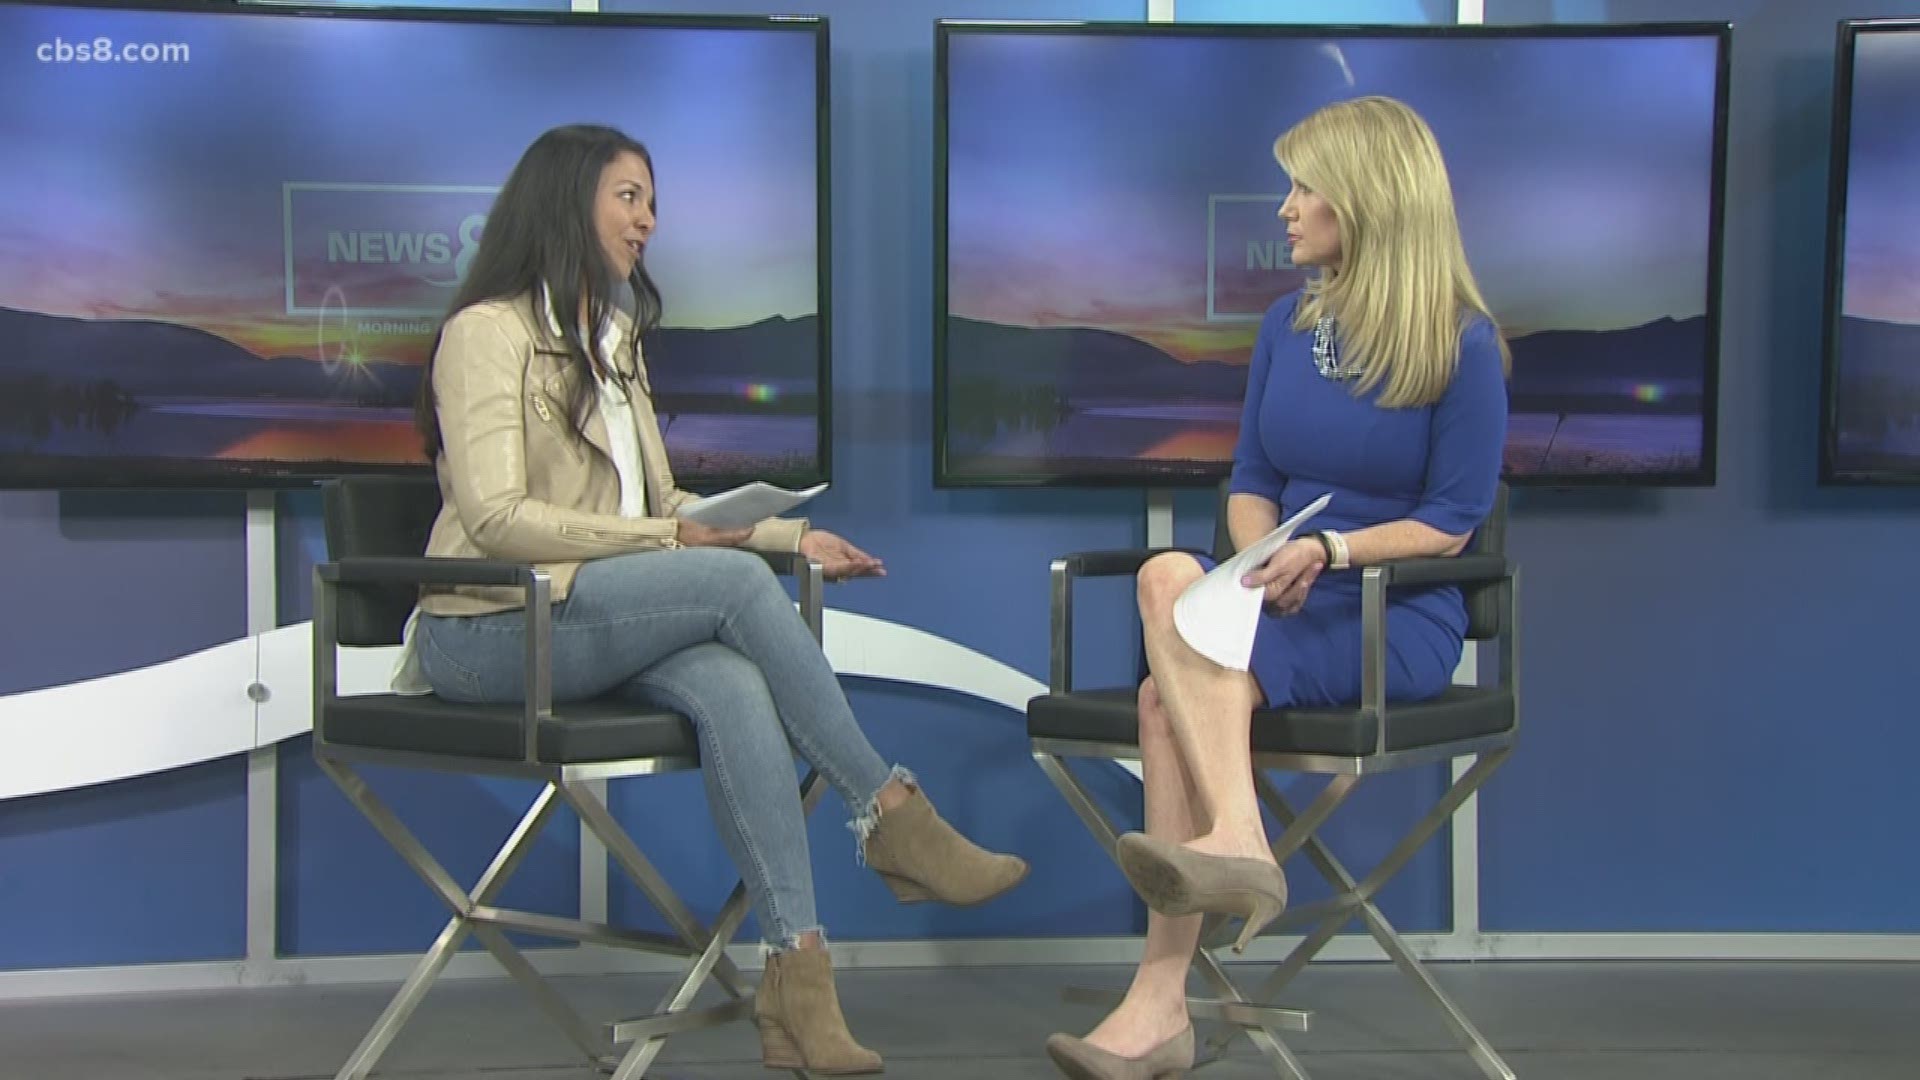 Marriage and Family Therapist, Amber Trueblood, joined News 8 to talk about managing anxiety, calming children, and how to keep your sanity if you are quarantined.